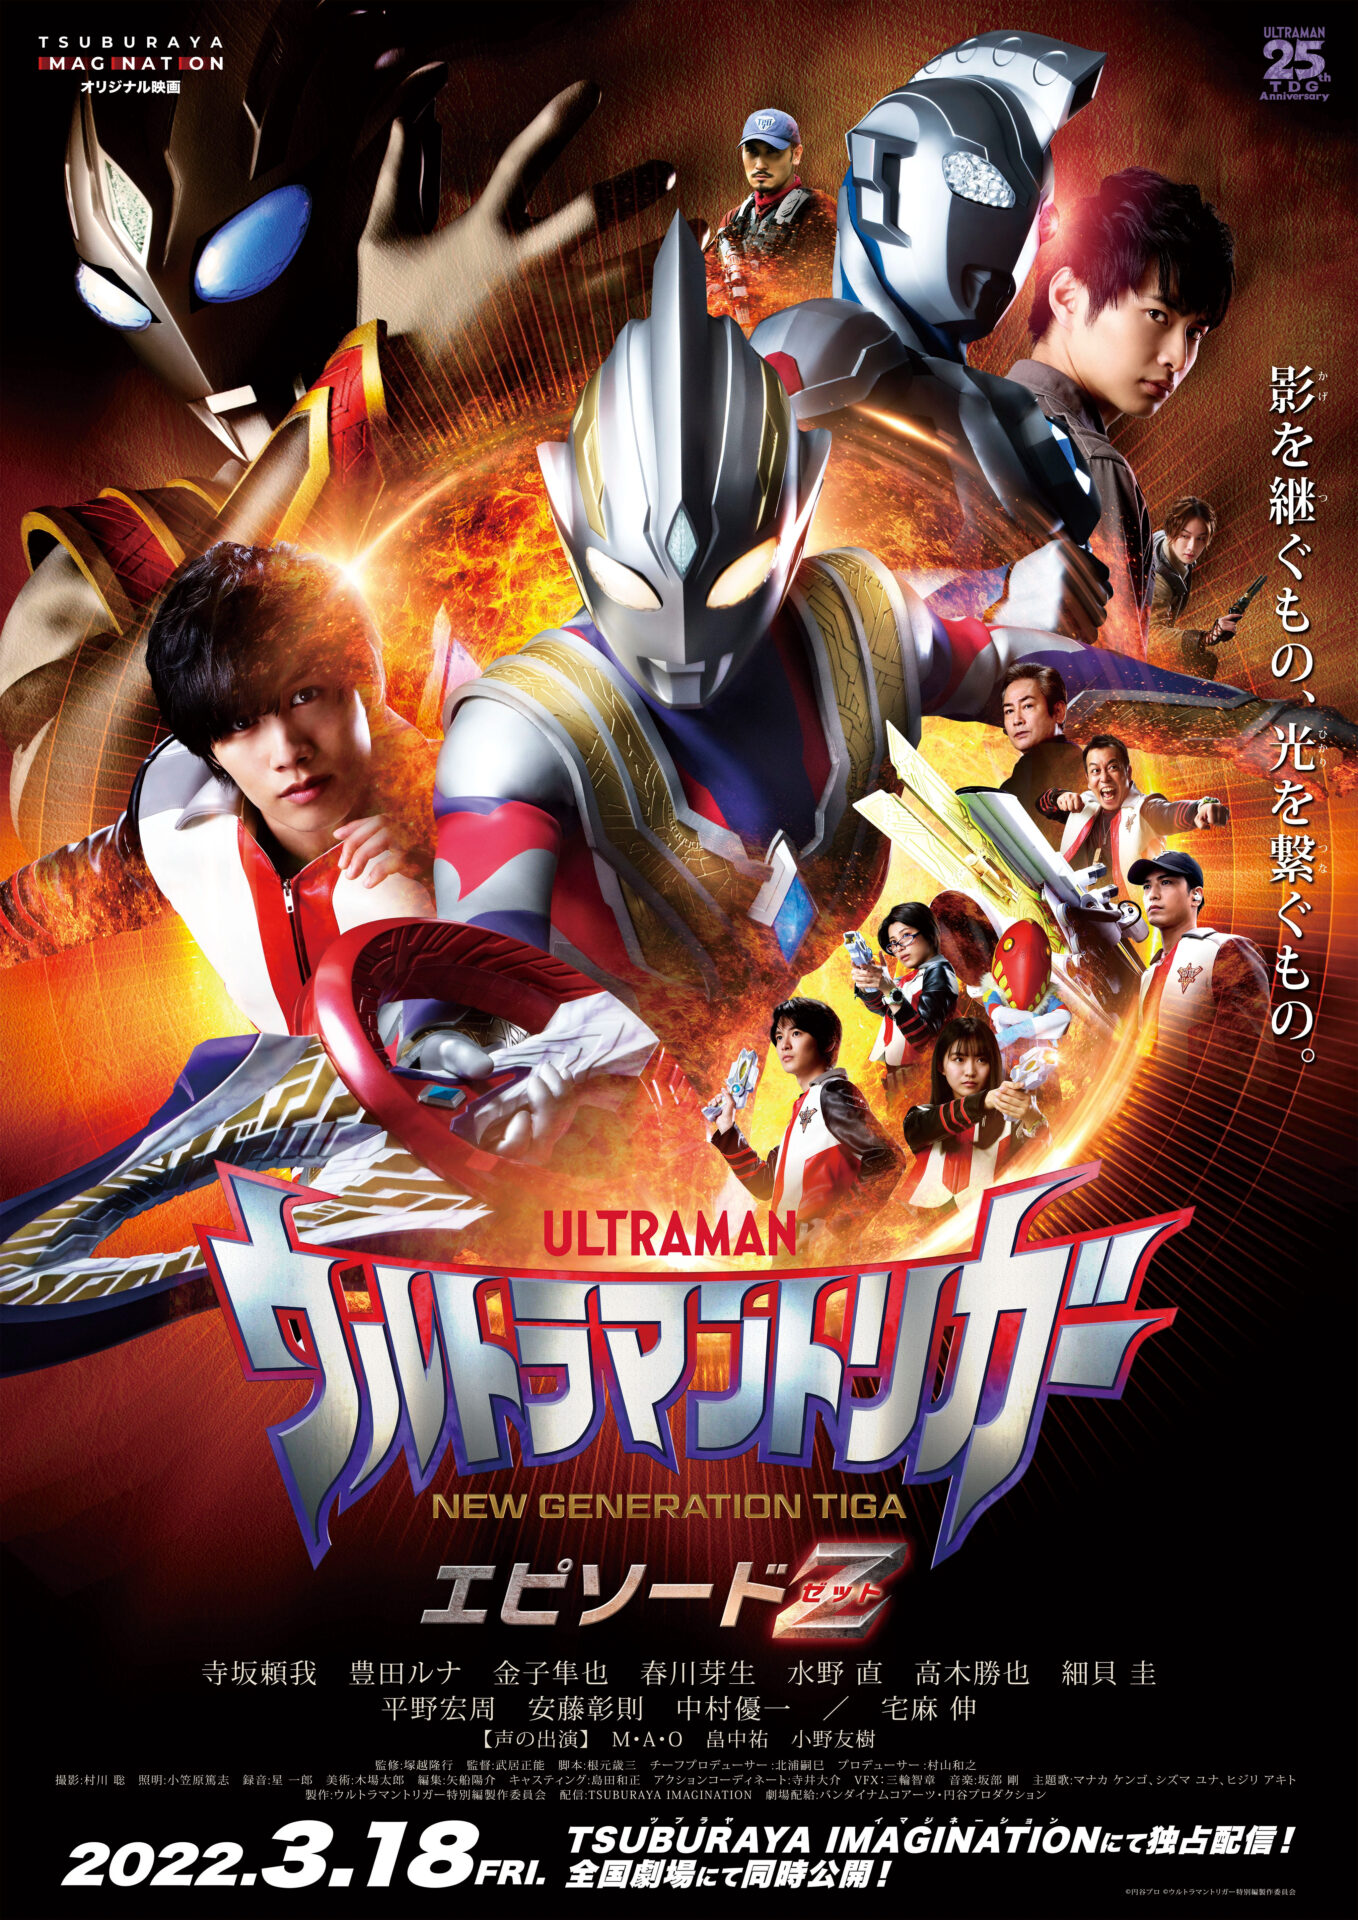 New Ultraman Trigger: Episode Z Film To Receive International Screening And  VOD Release Alongside Japanese Premiere - Bounding Into Comics